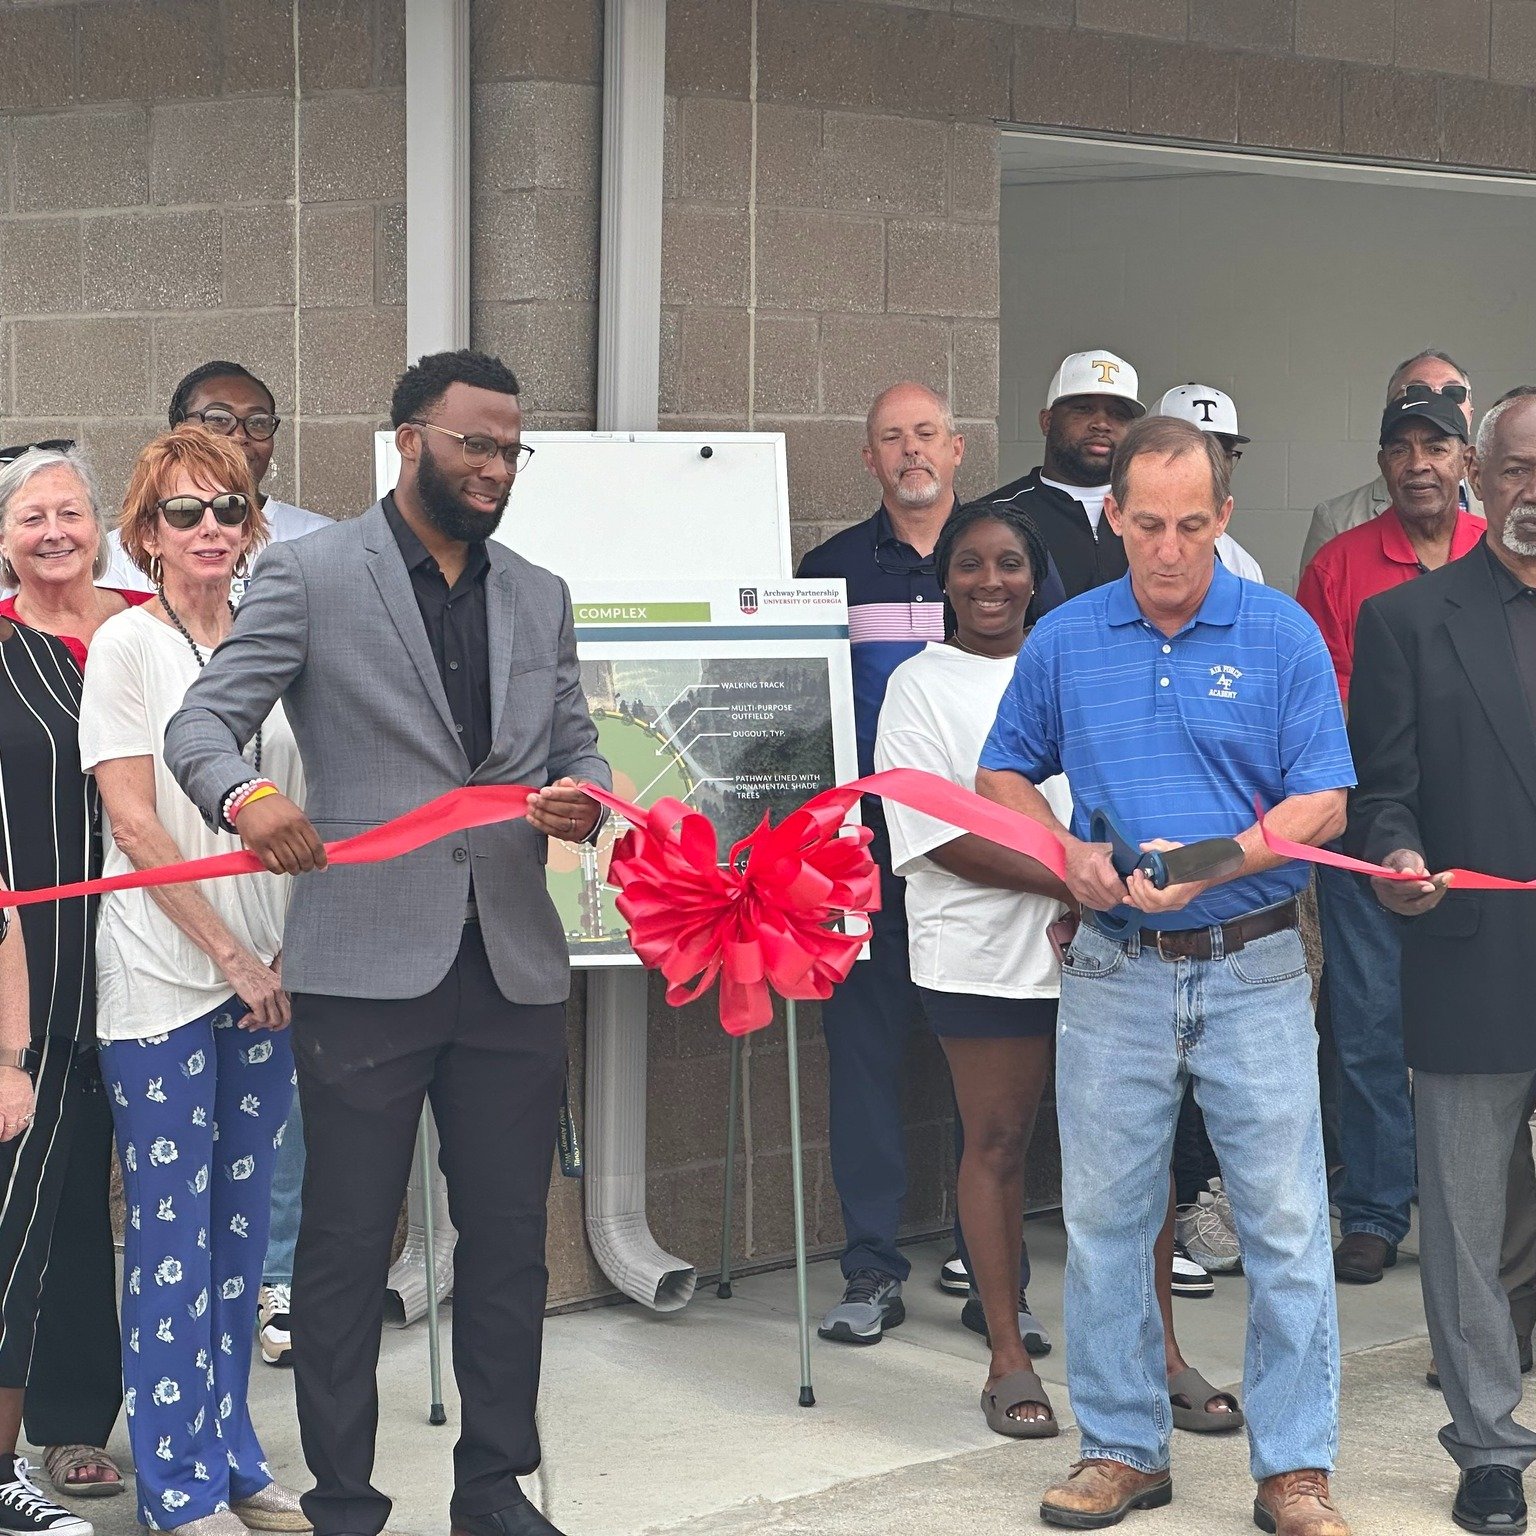 Congratulations to McDuffie County  the Thomson McDuffie Rec Department on a successful ribbon cutting for their new scoring tower today! This is one of many @archwaypartnership  projects in our community and made possible by SPLOST!